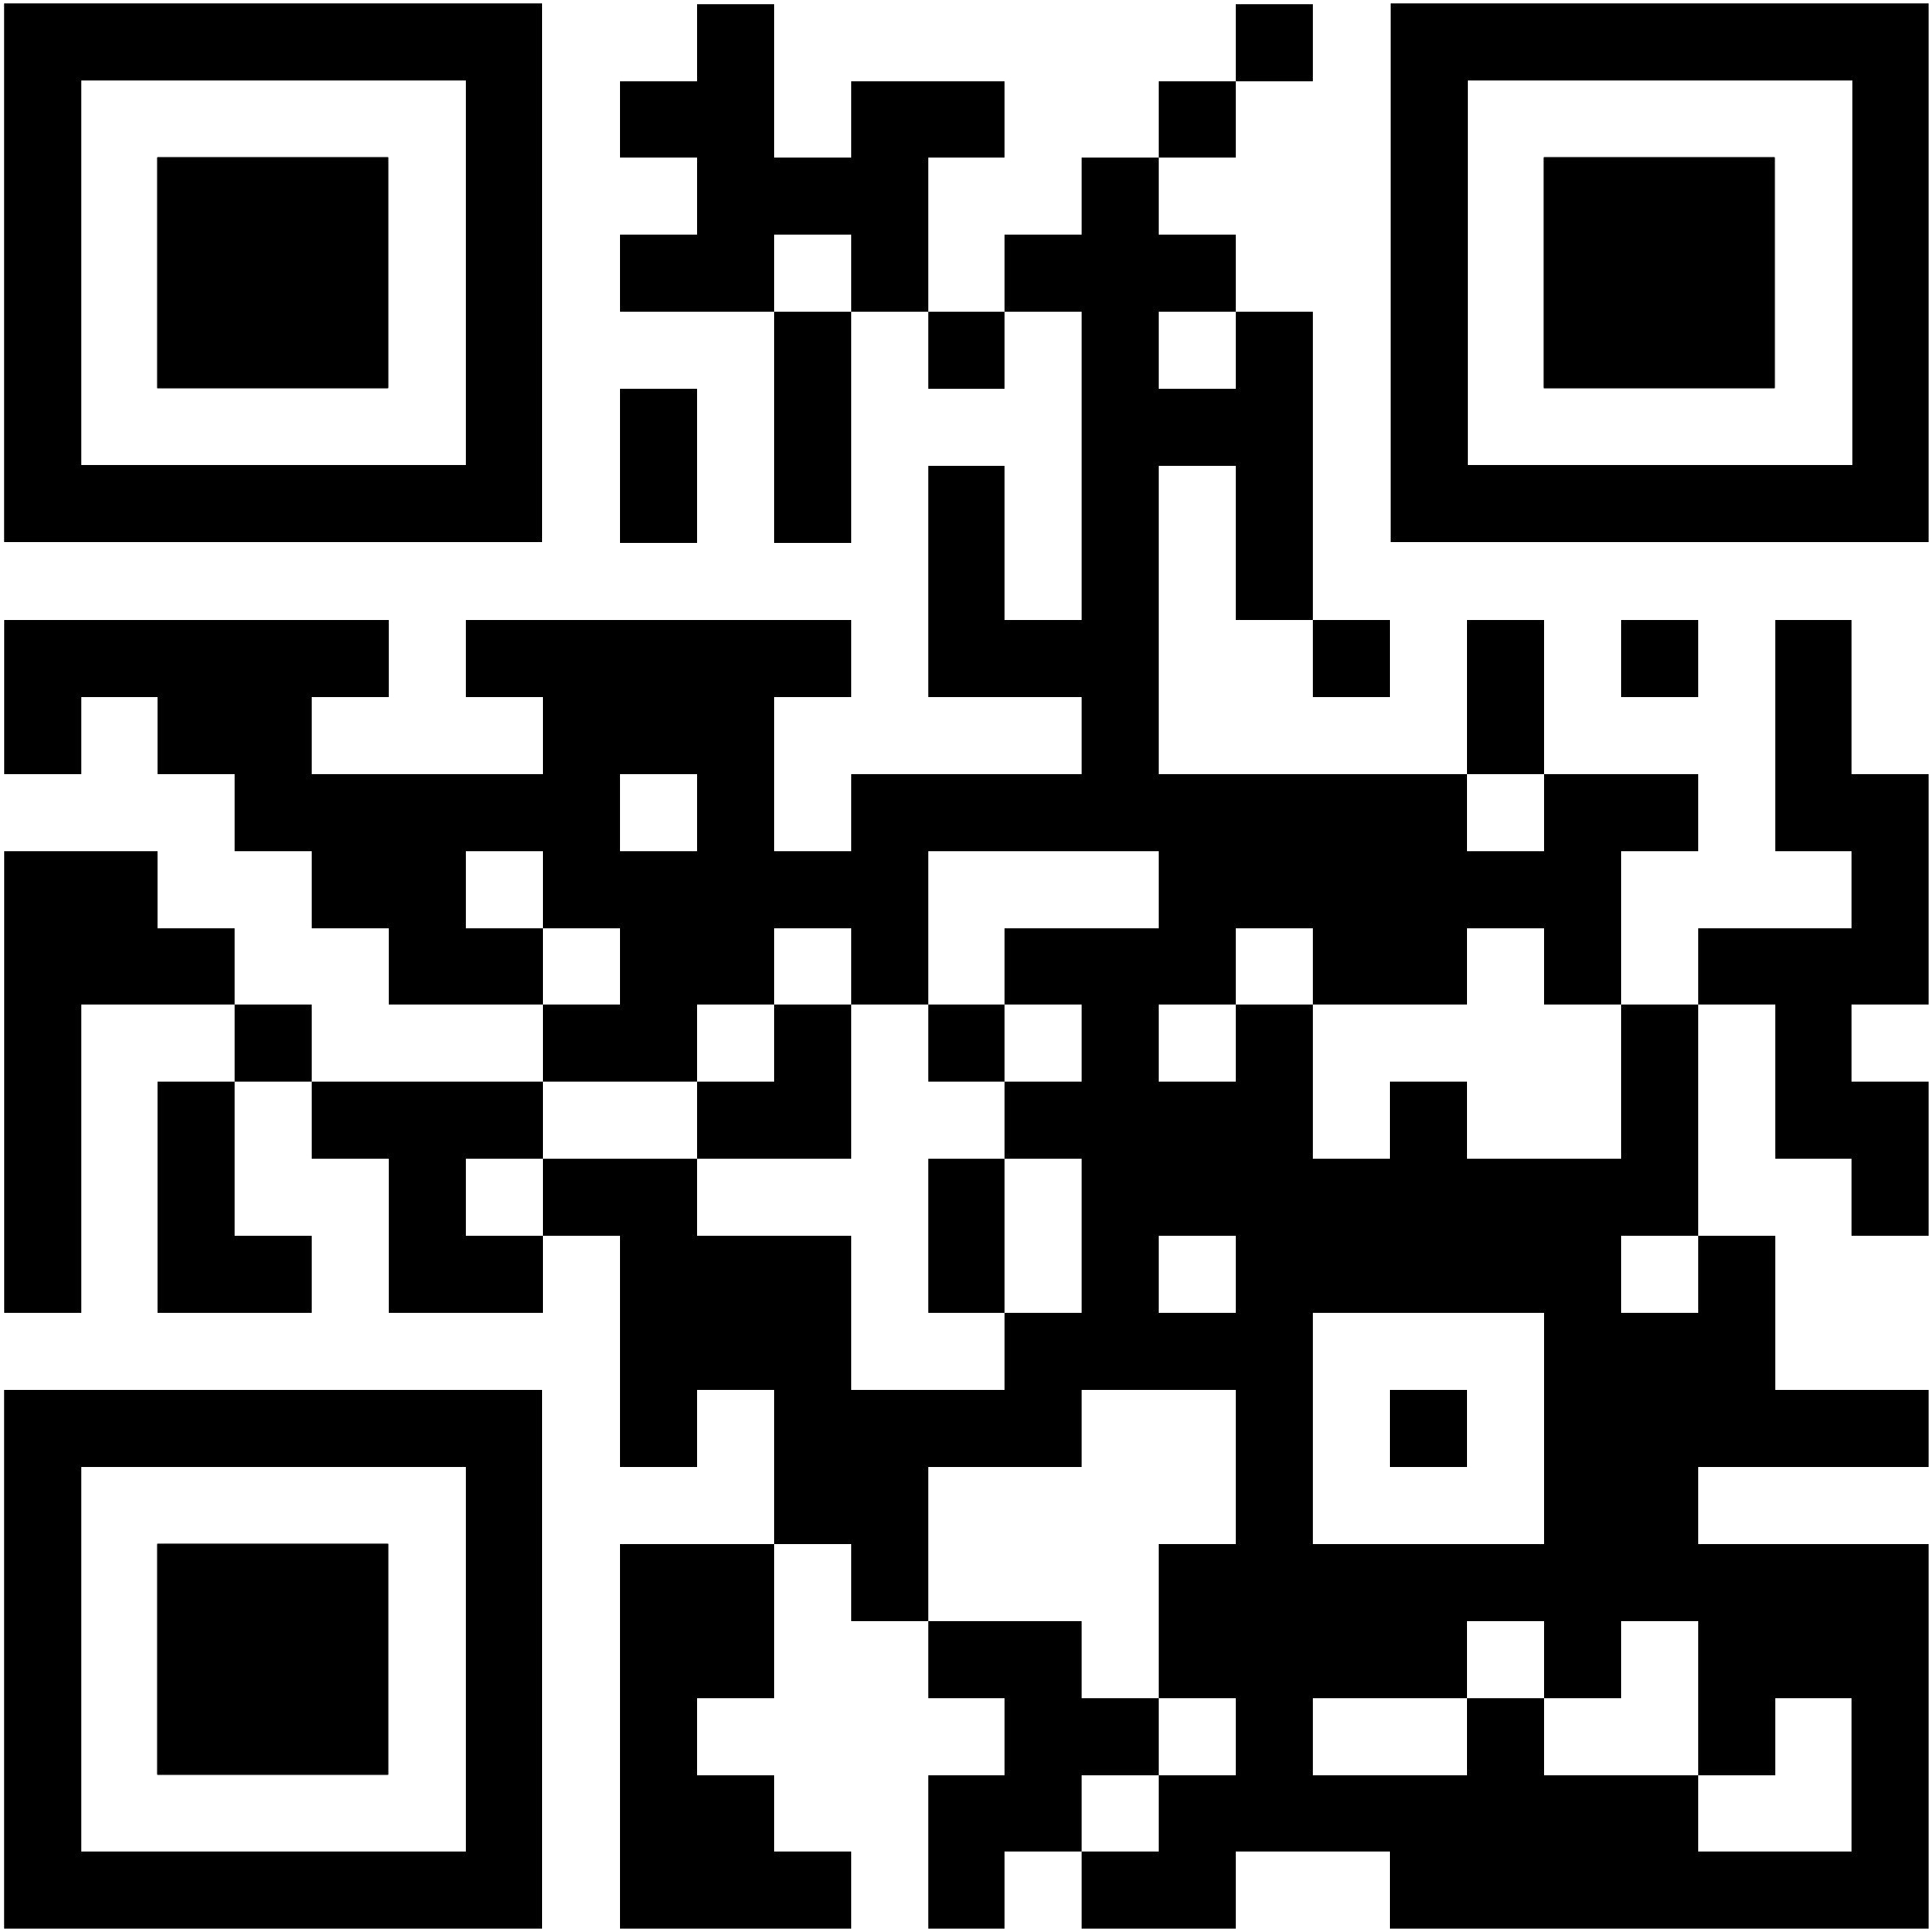 A Black Grid With White Squares